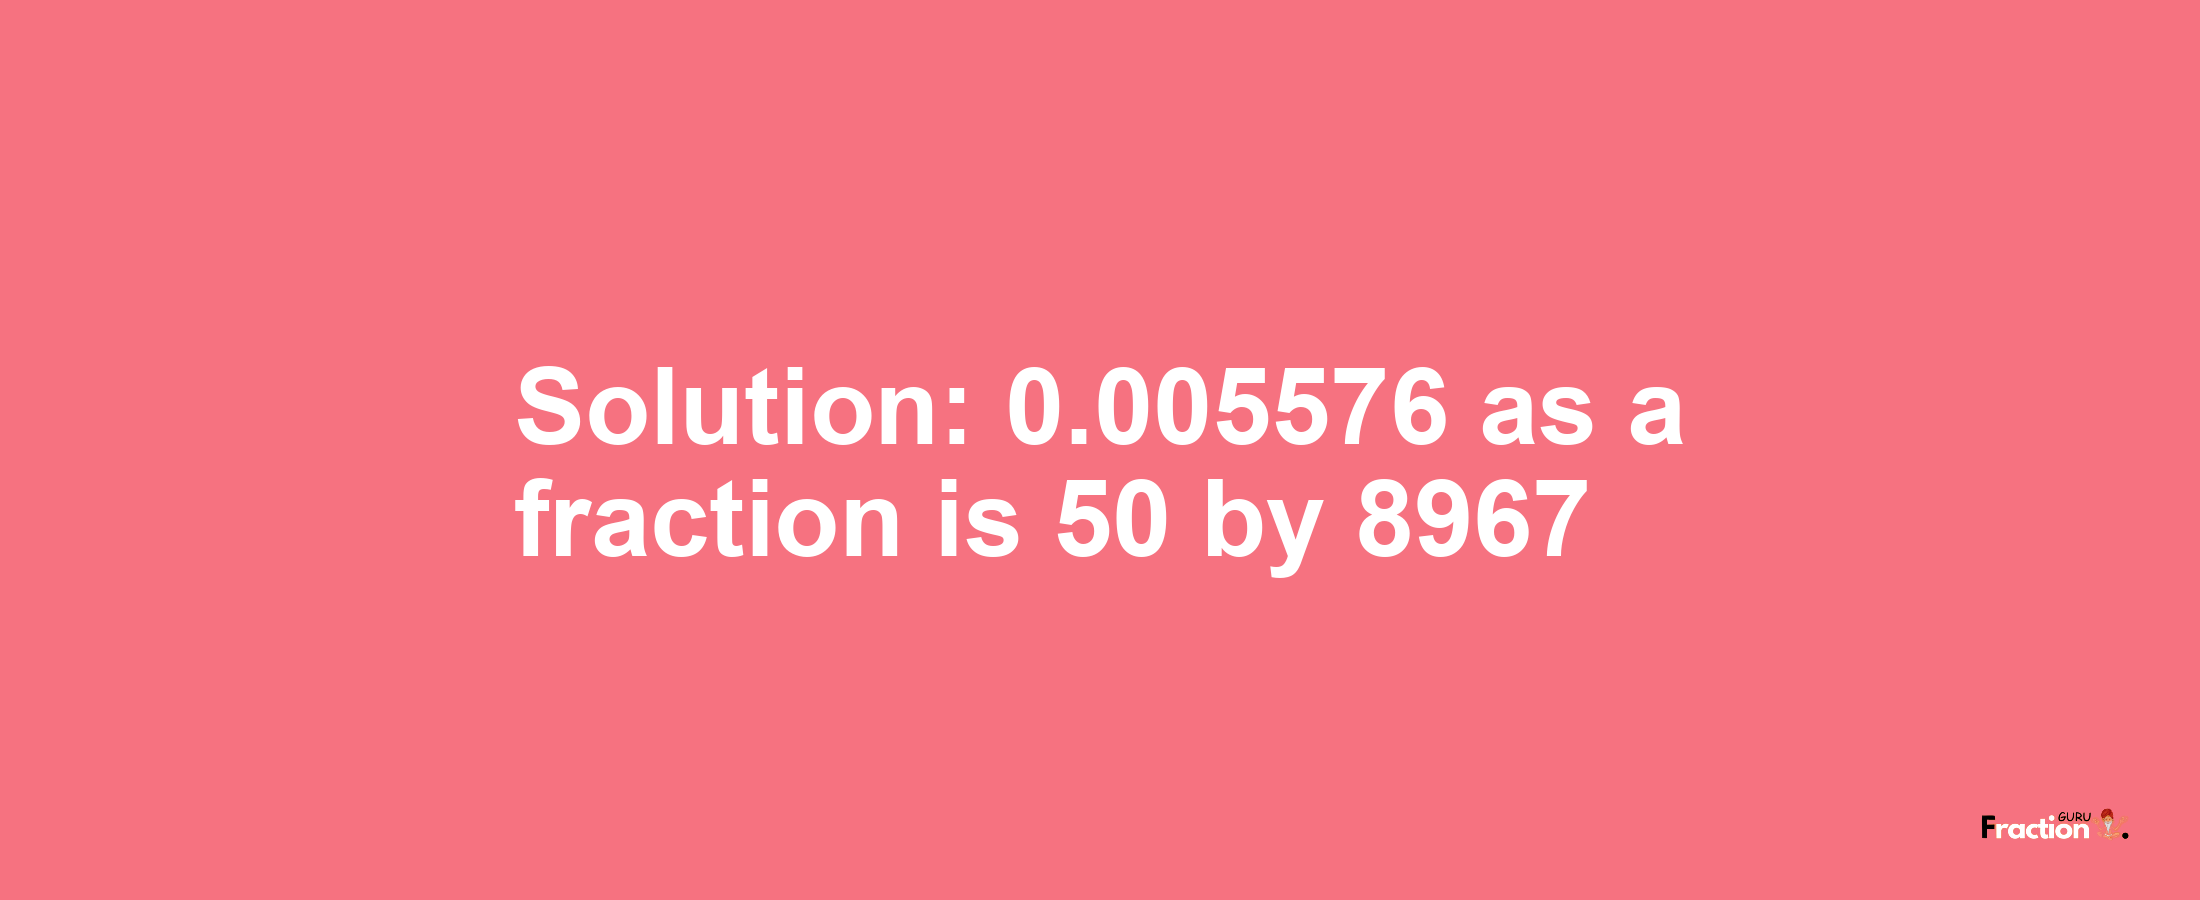 Solution:0.005576 as a fraction is 50/8967